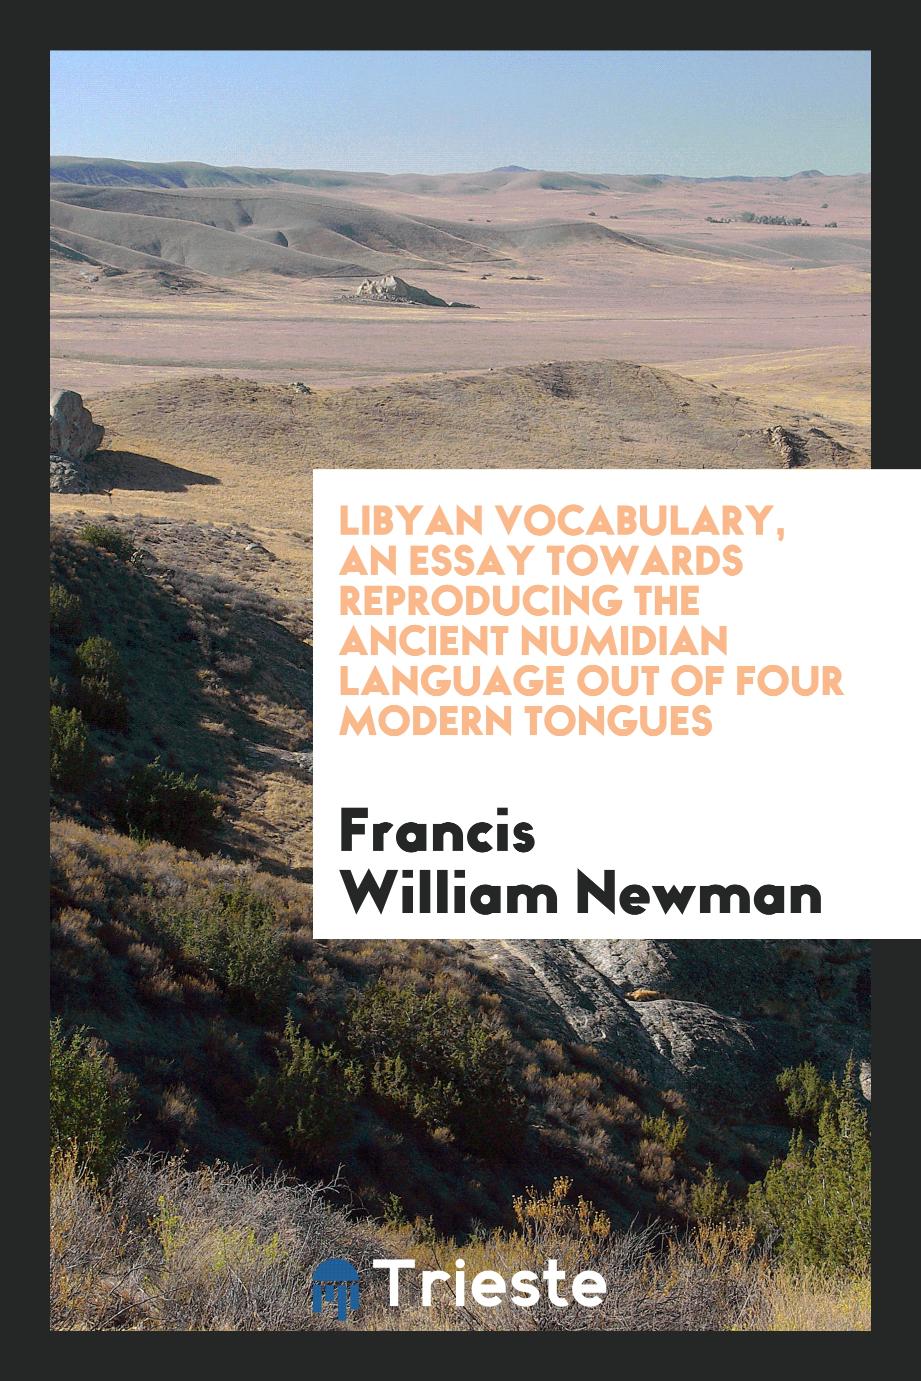 Libyan Vocabulary, an Essay towards Reproducing the Ancient Numidian Language out of Four Modern Tongues